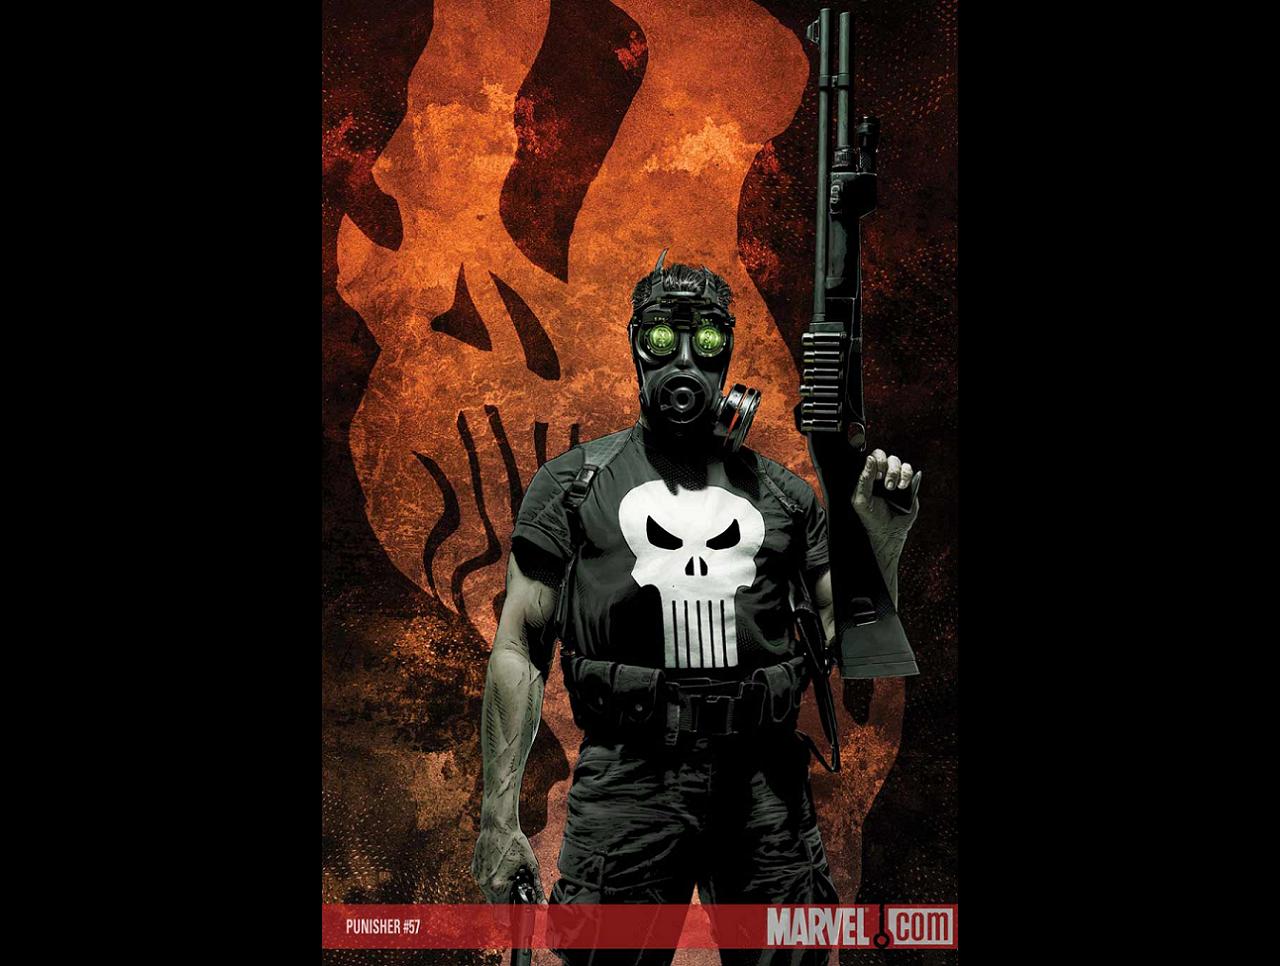 The Punisher wallpaper is huge. The others should look fine on a 1024x768 